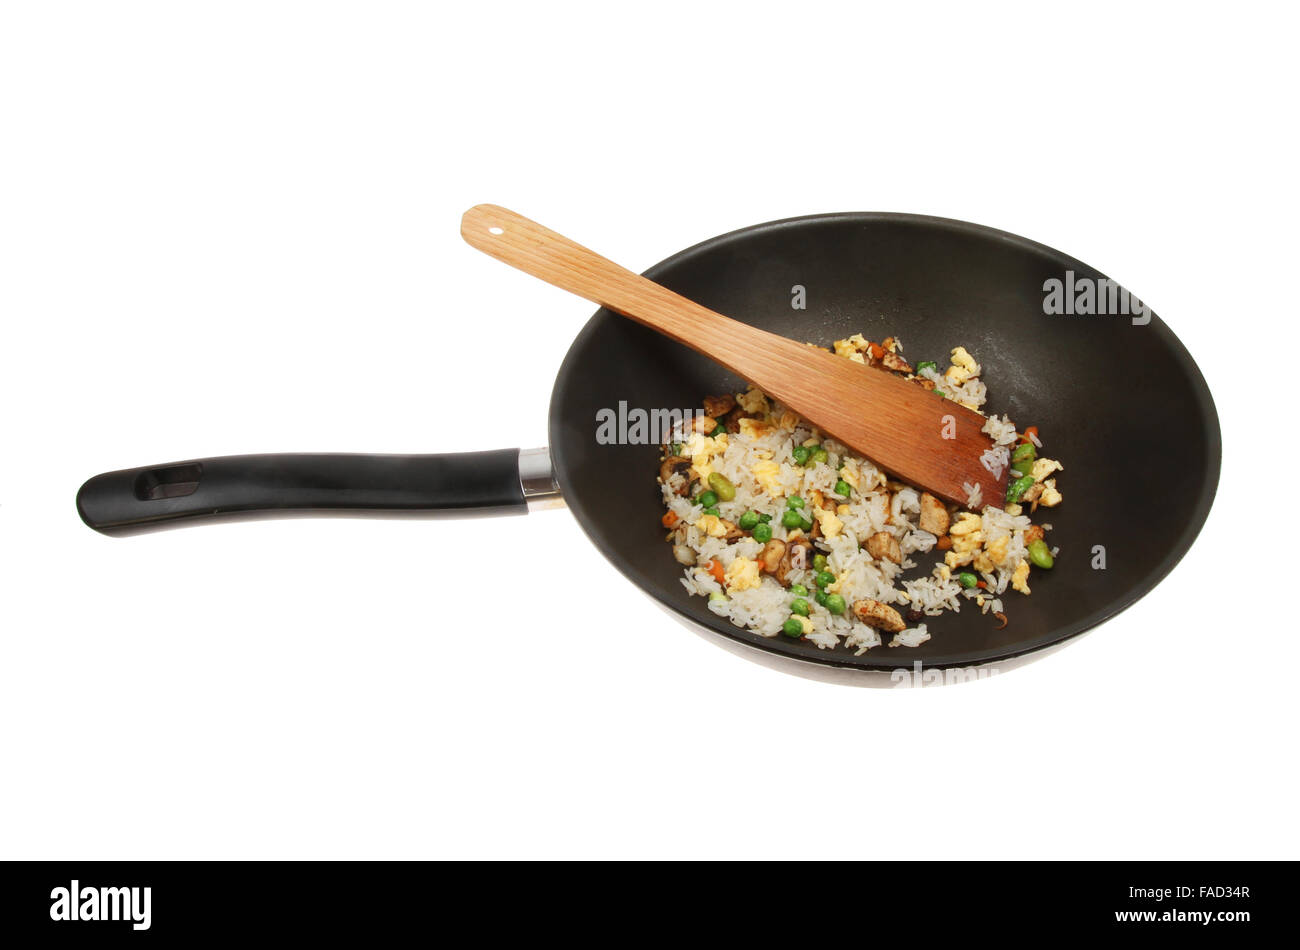 Fried rice with a wooden spatula in a wok isolated against white Stock Photo